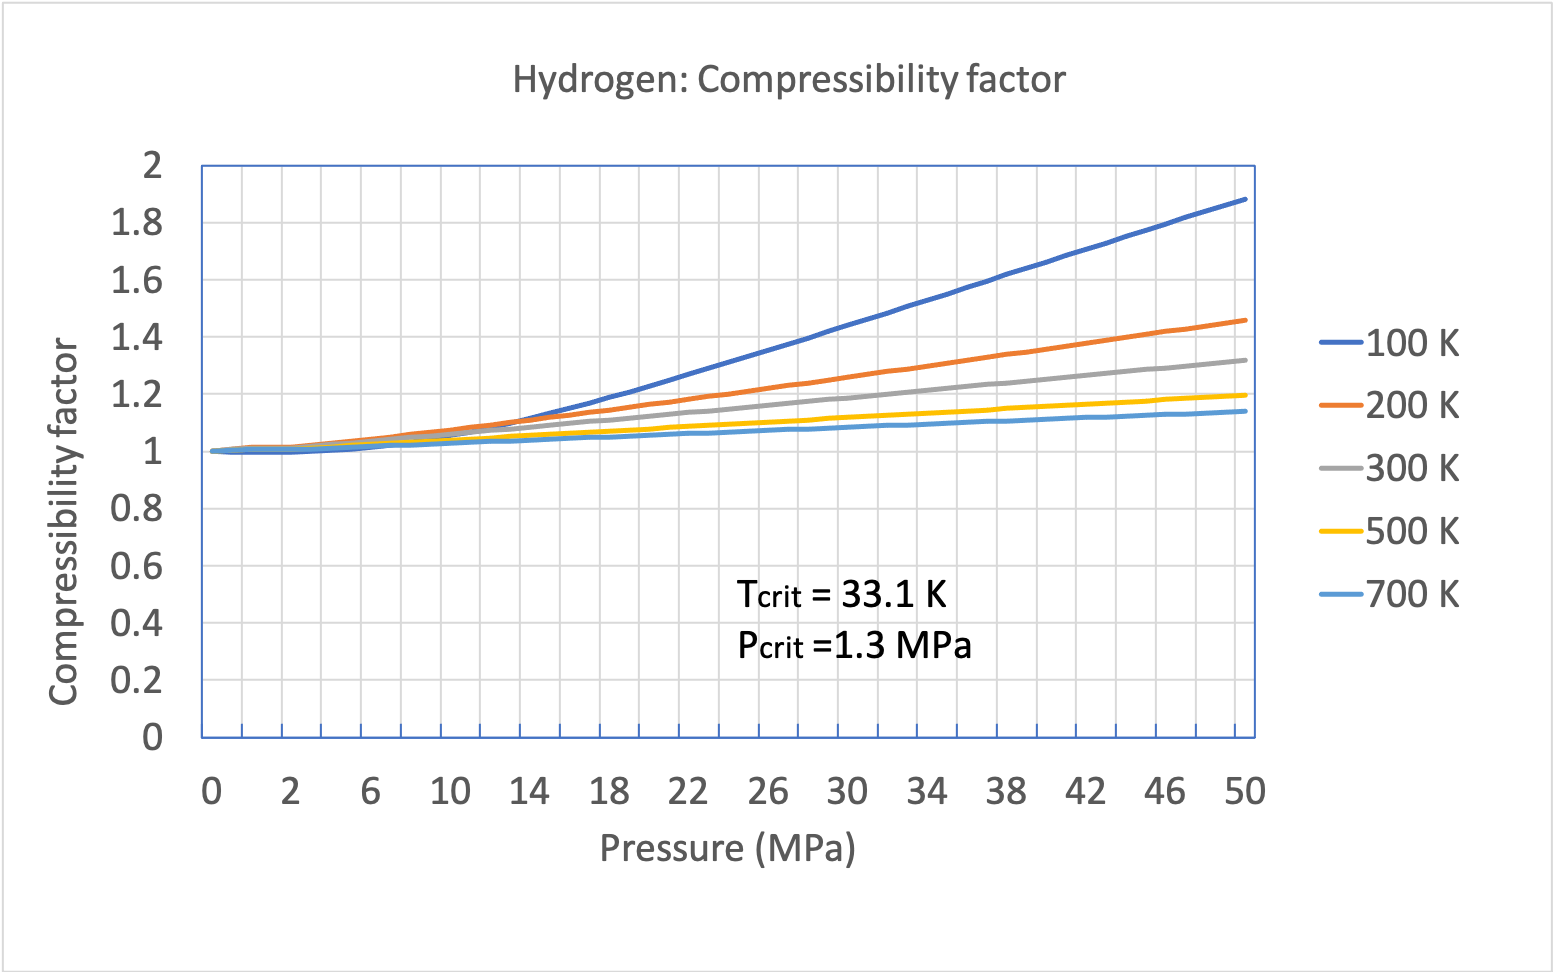 Solved] Why is the compressibility factor less than 1 at most